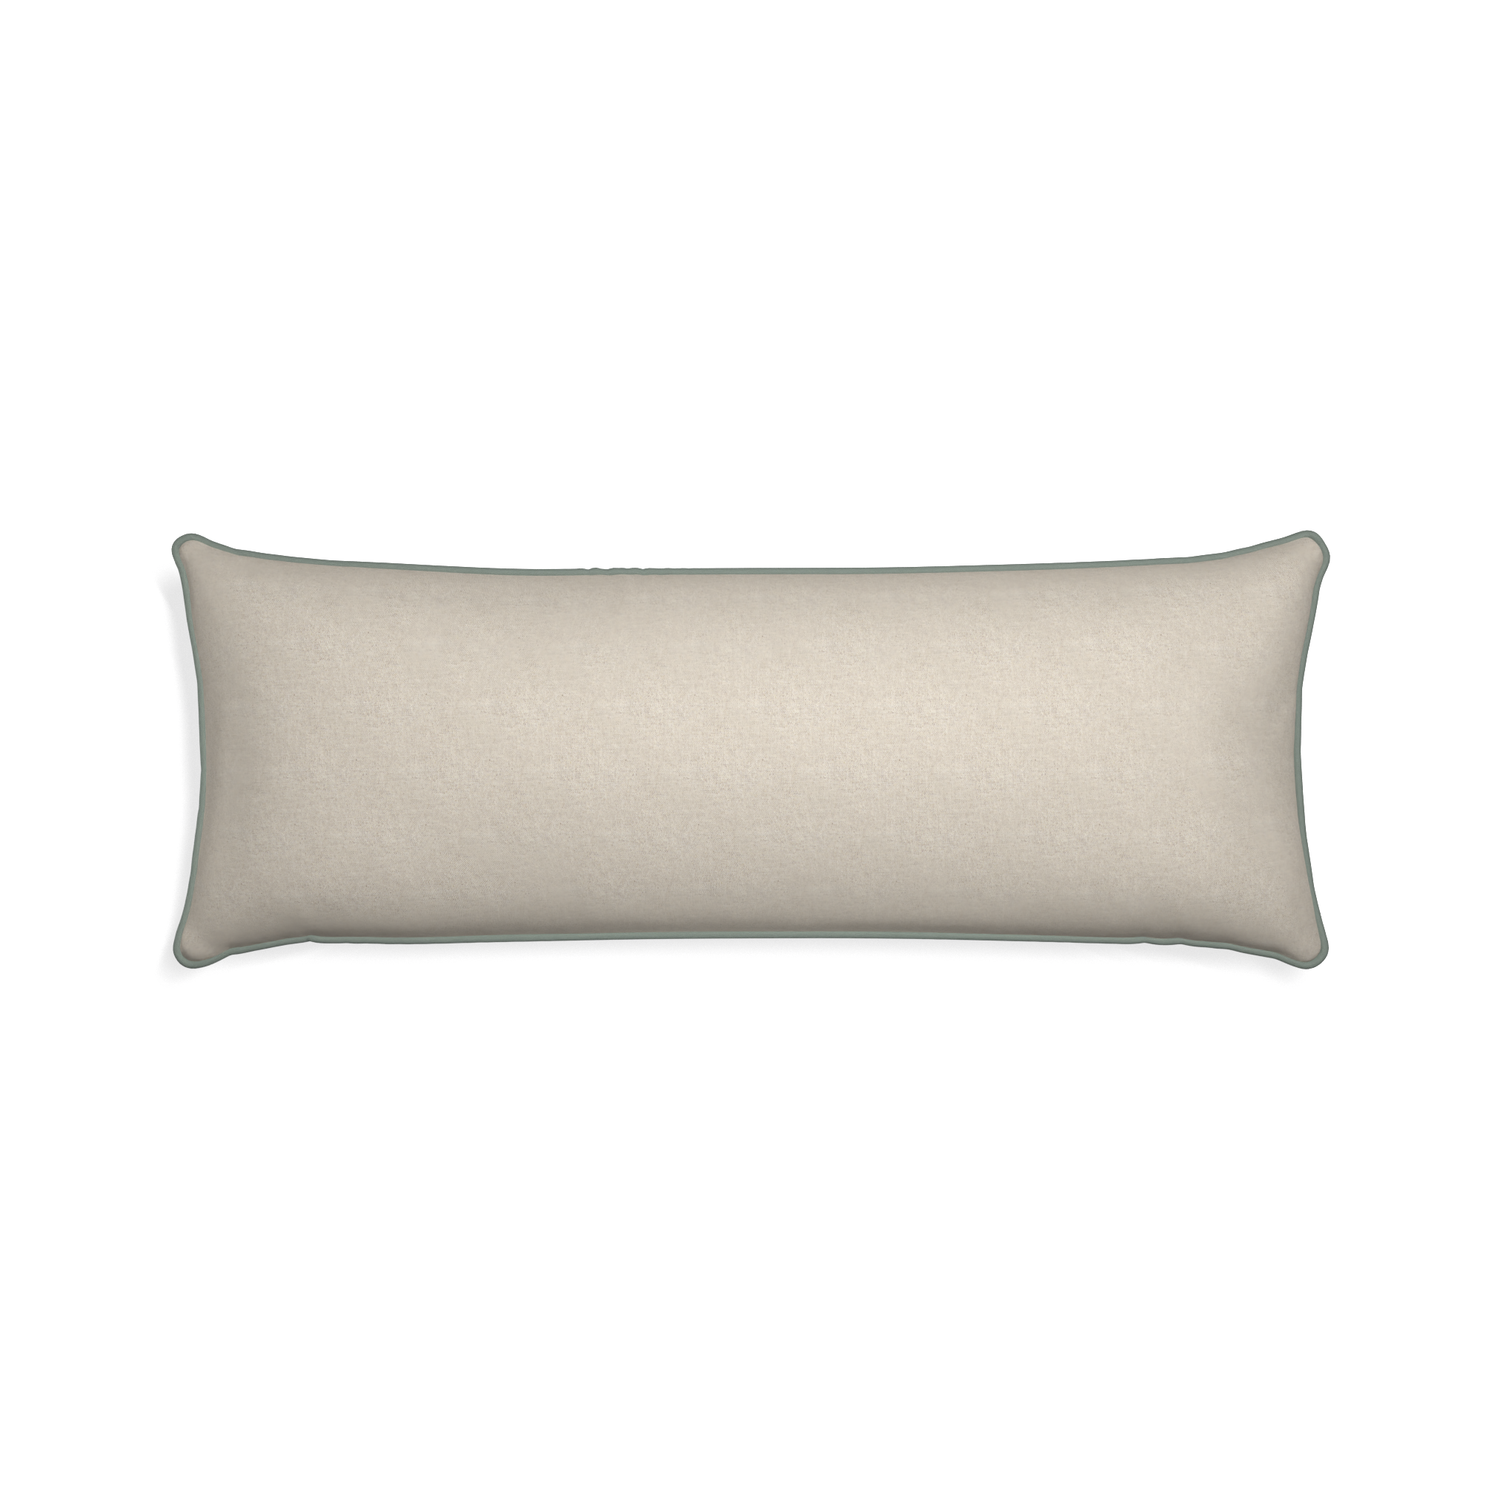 Xl-lumbar oat custom light brownpillow with sage piping on white background